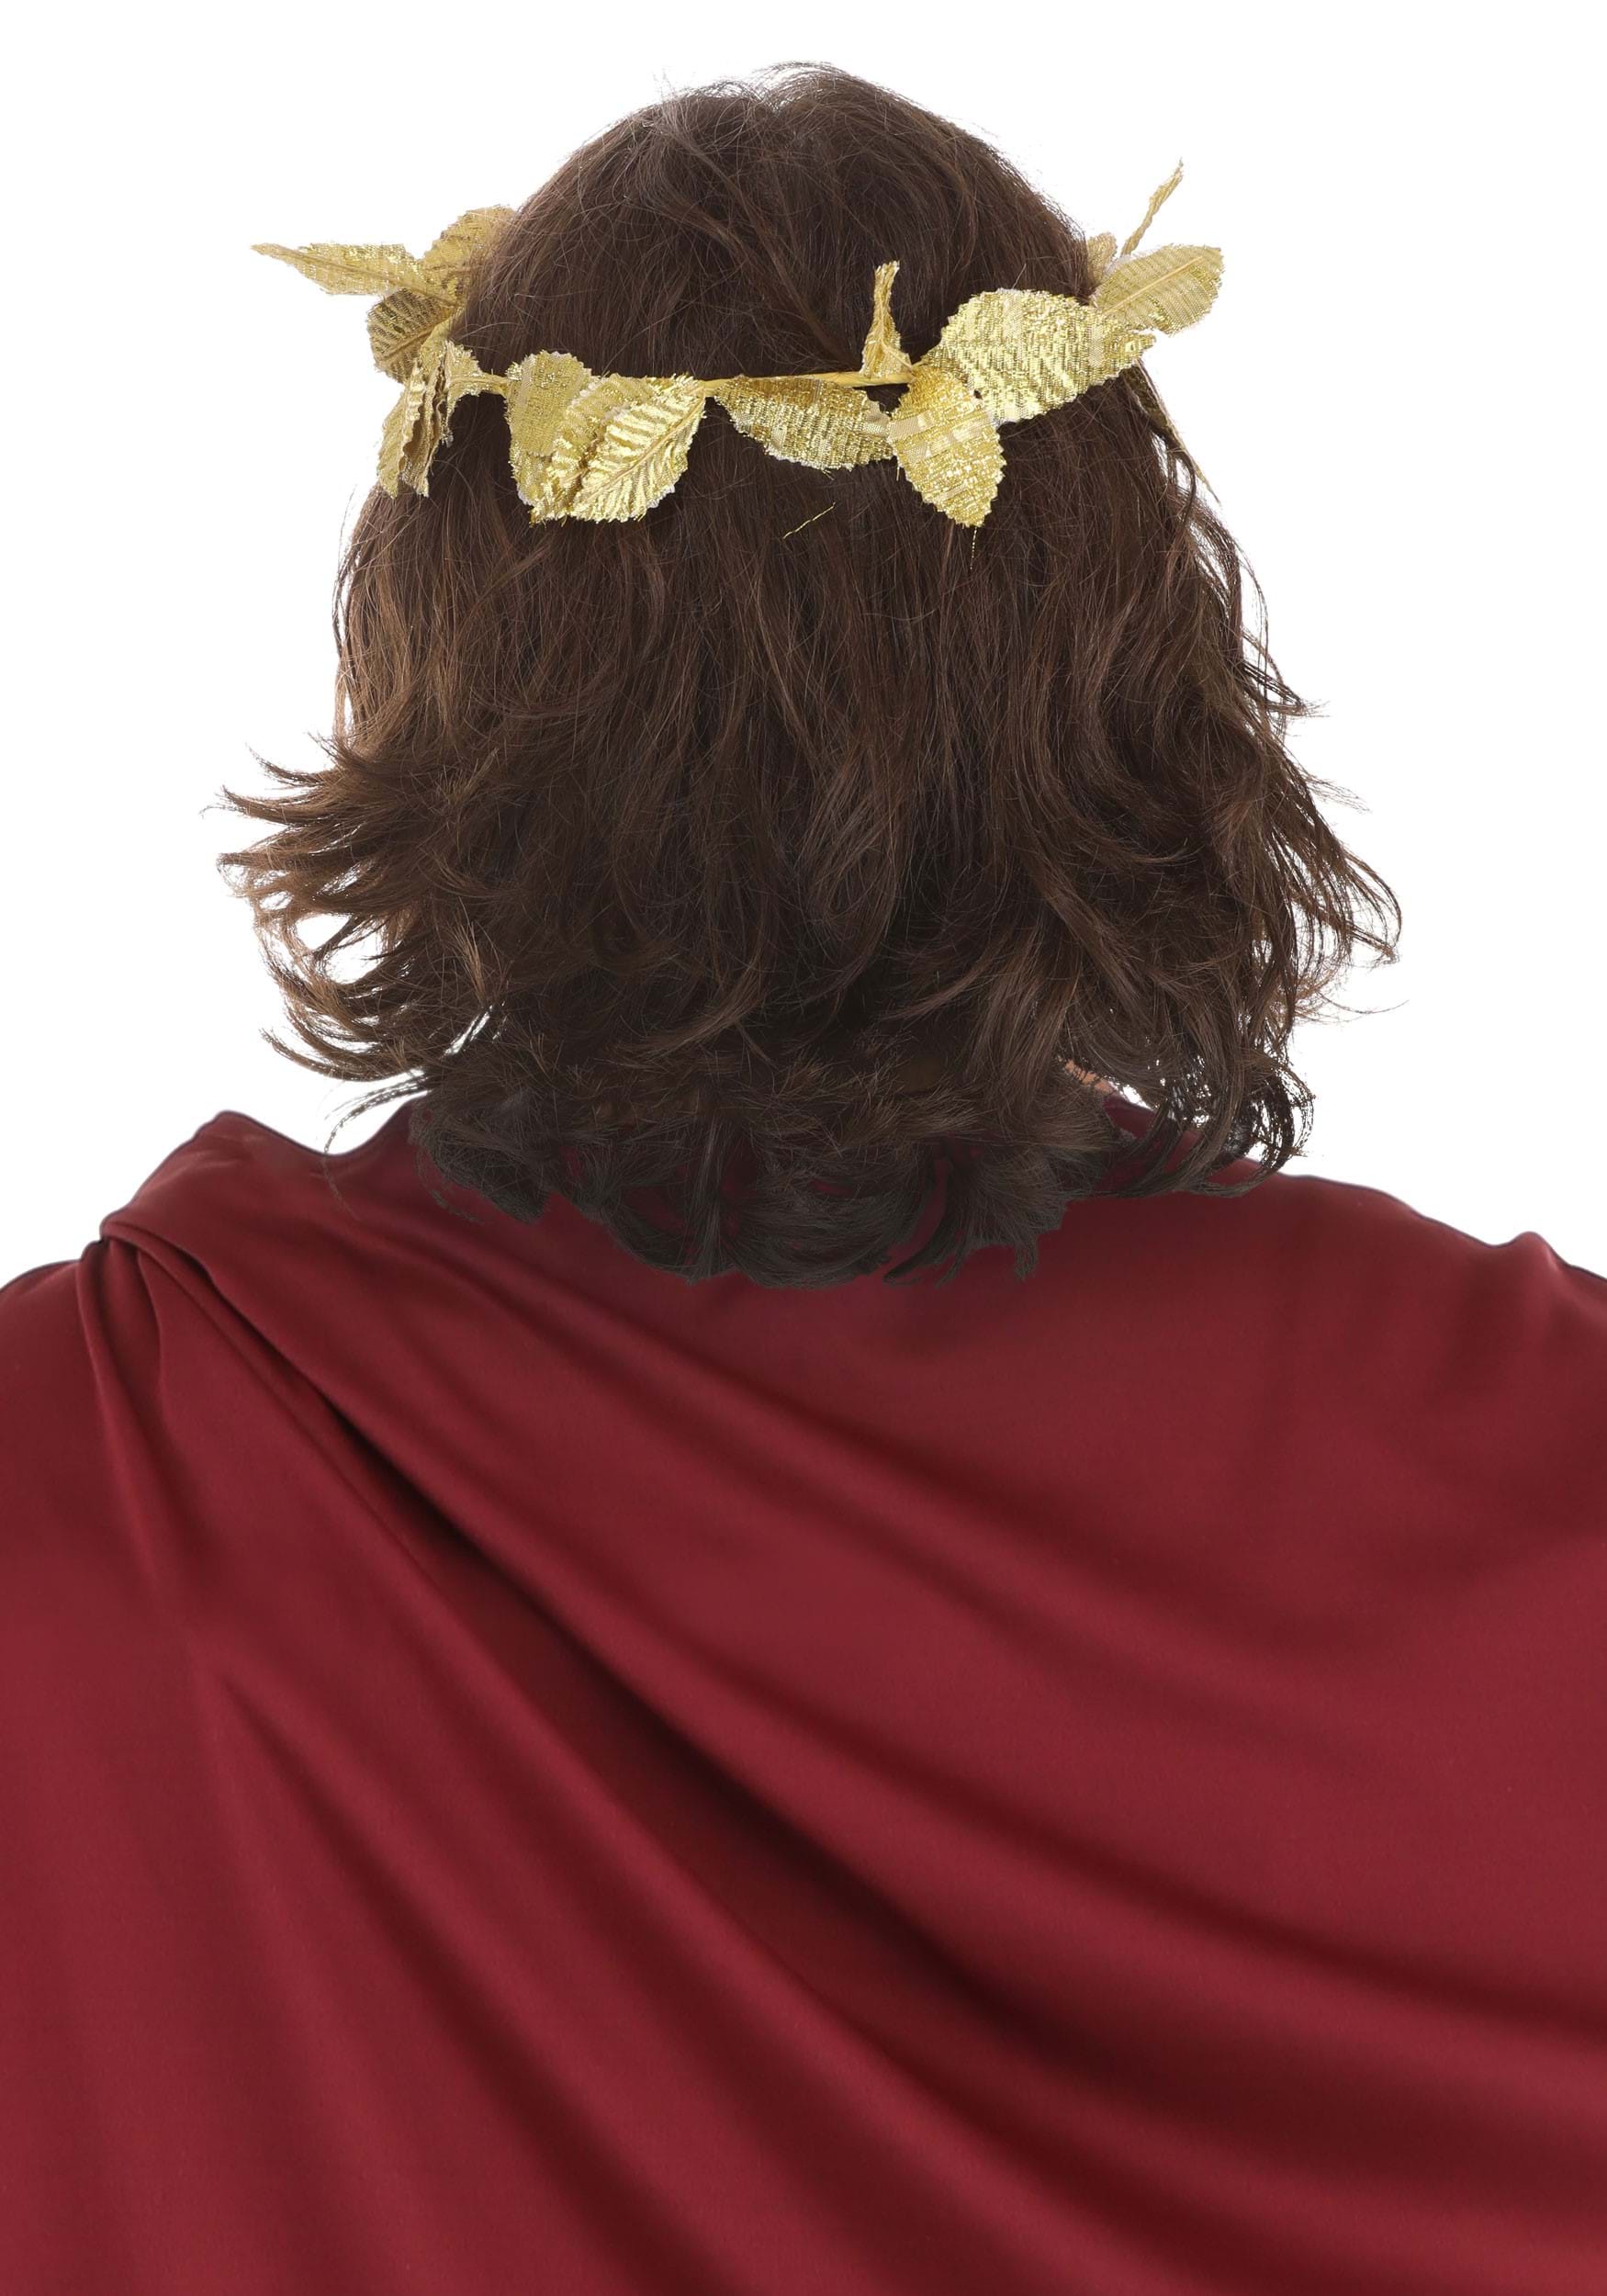 Deluxe Gold Leaf Crown Accessory